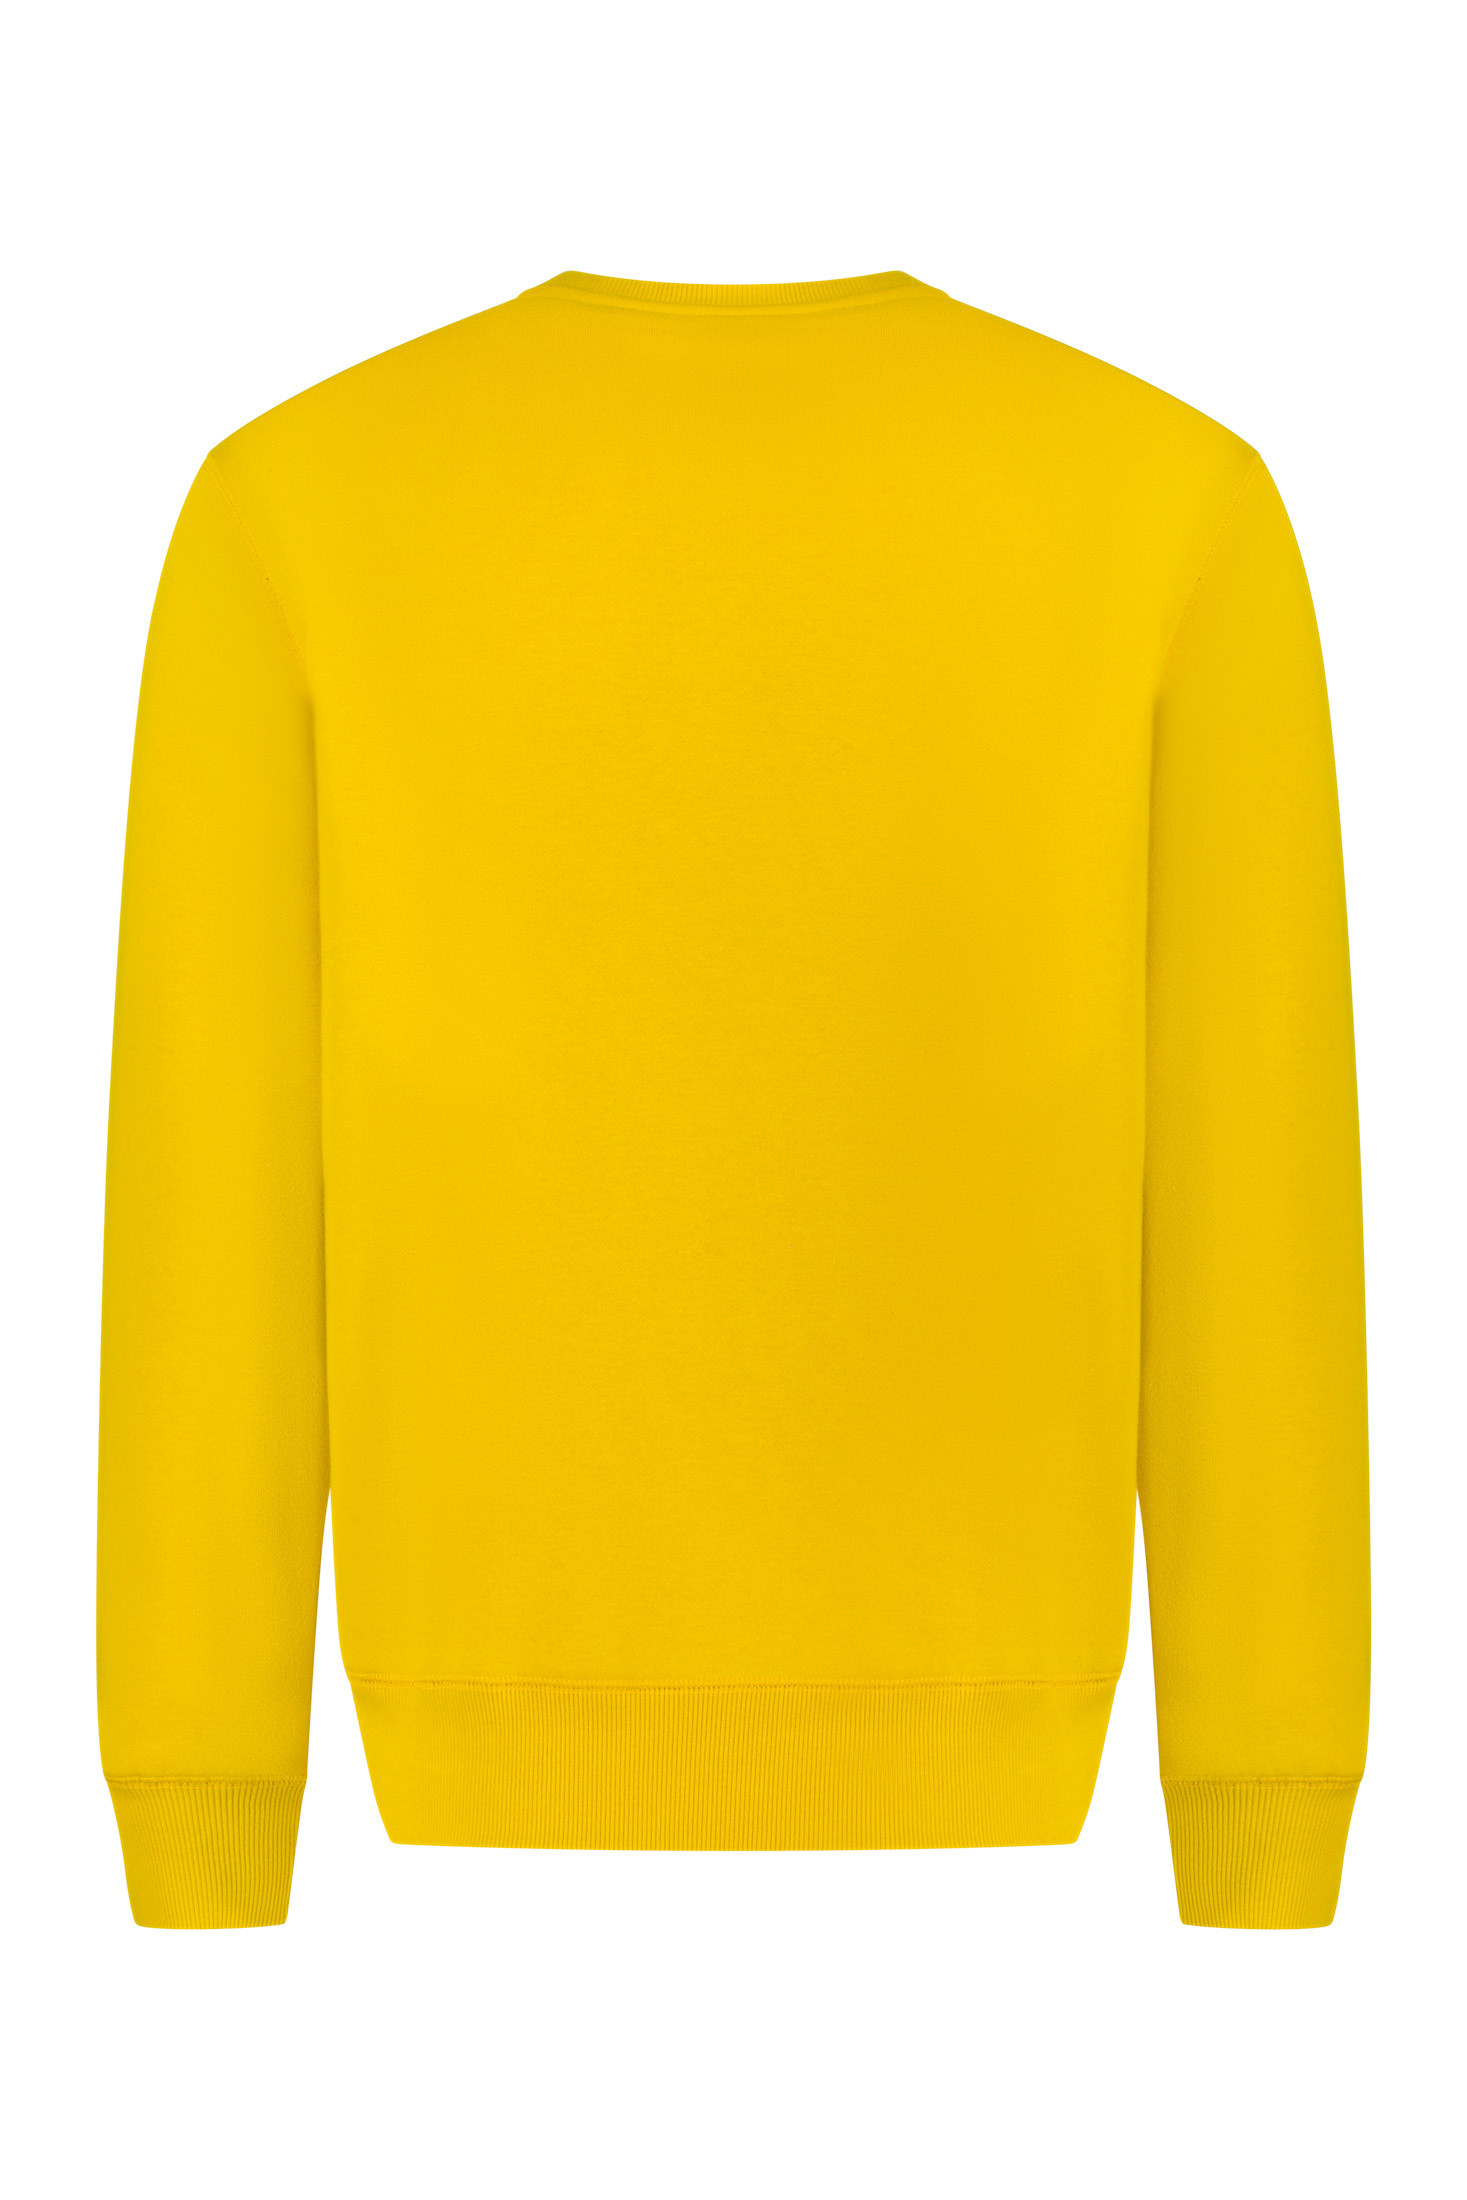 Russell Athletic - Sweatshirt with embroidery, Yellow, large image number 1